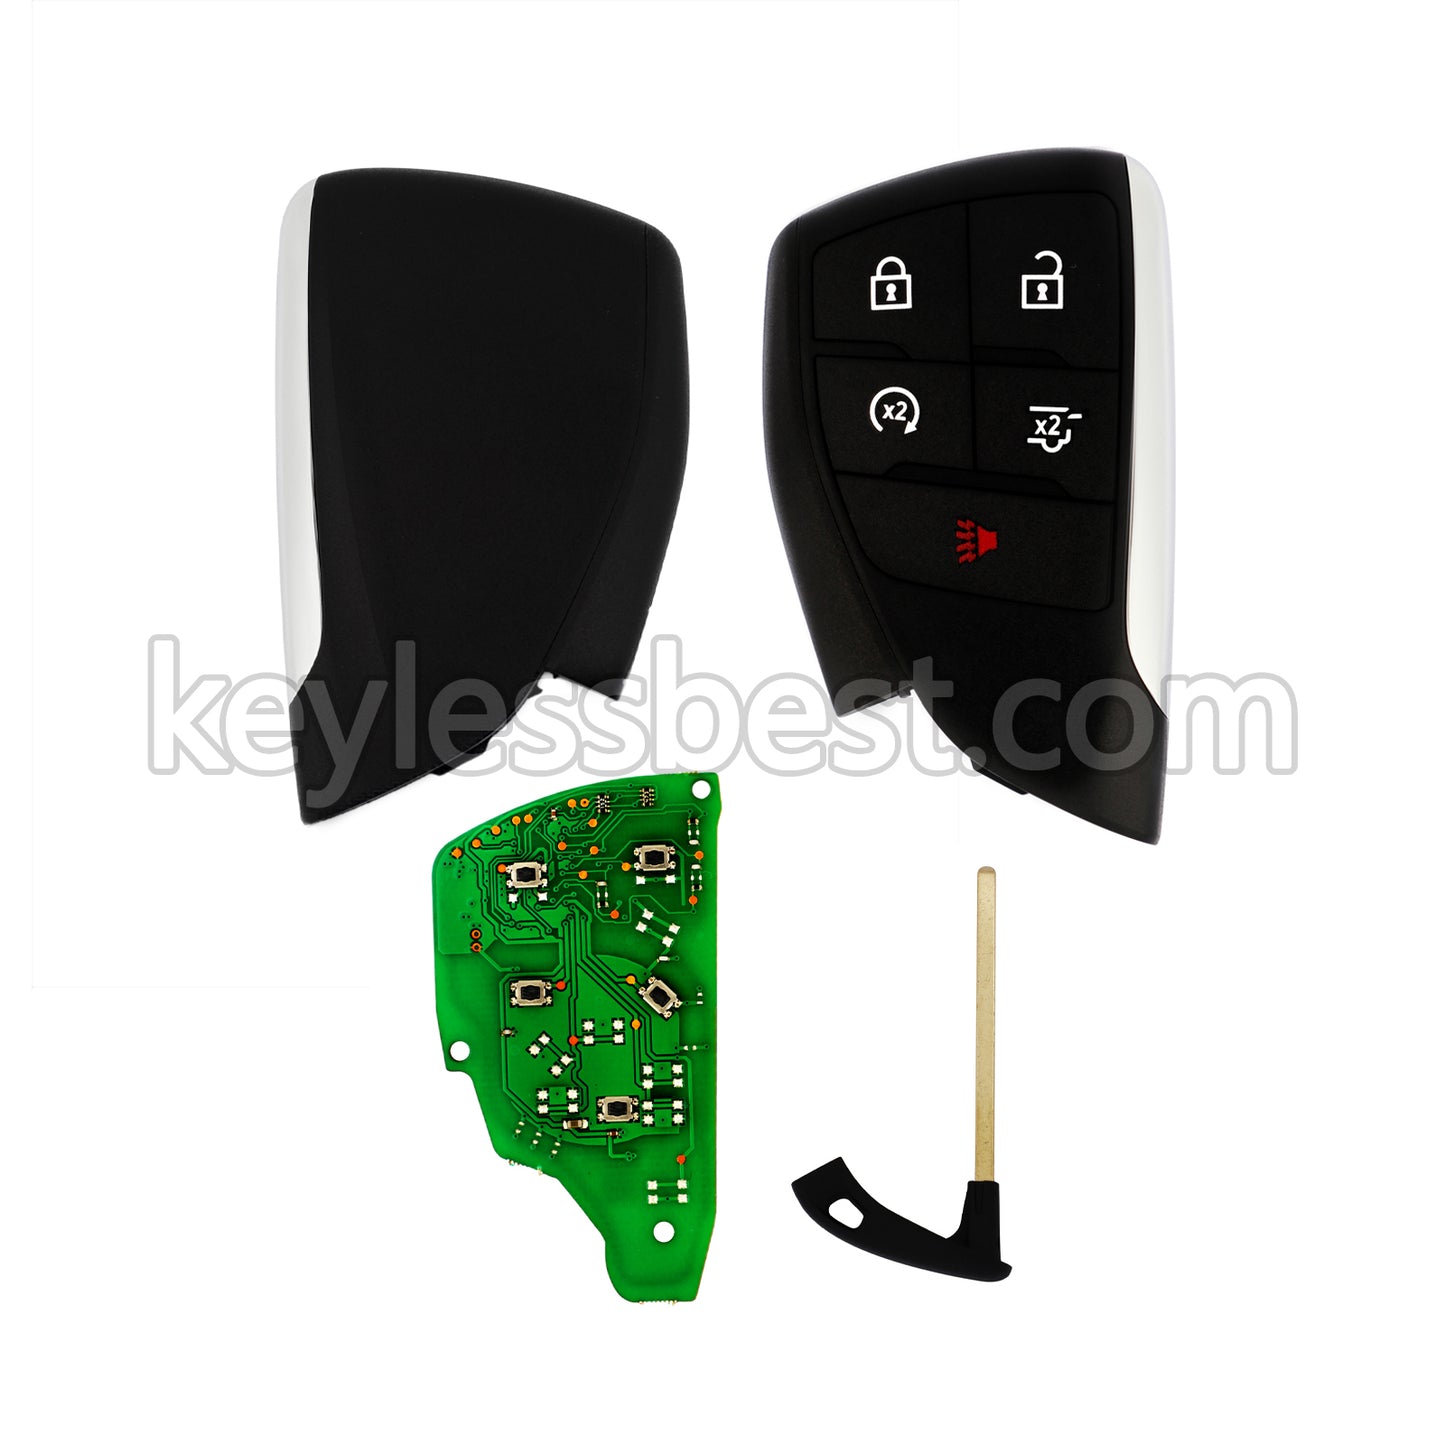 2020 Buick Enclave / 5 Buttons Remote Key / YG0G21TB2 / 433MHz